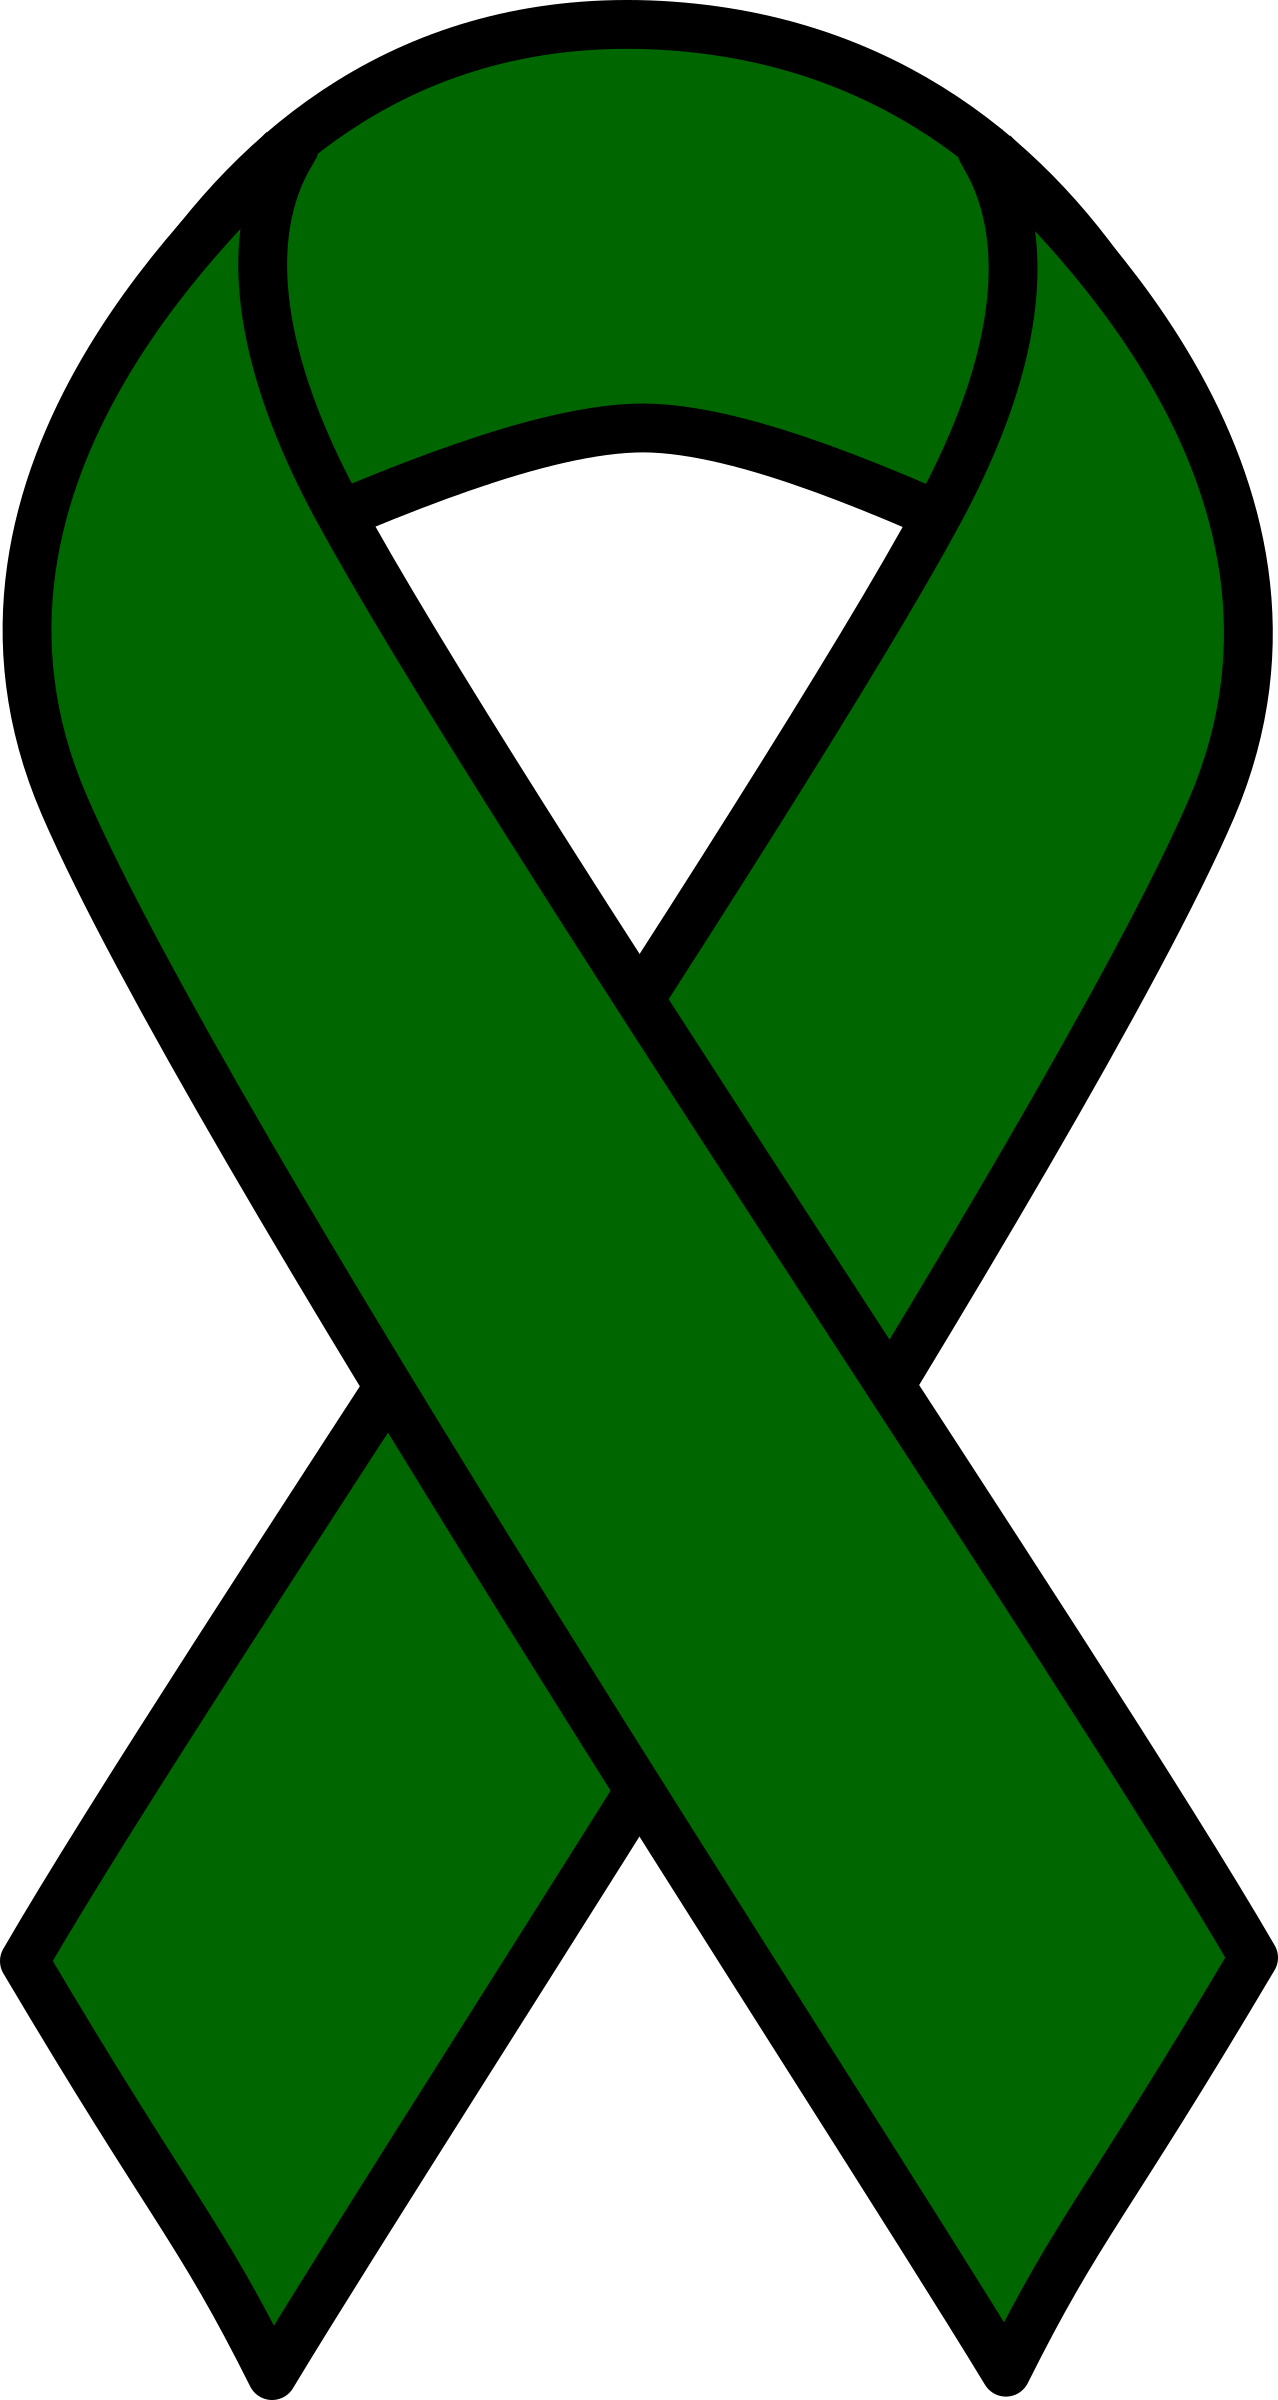 Big Image - Head And Neck Cancer Ribbon (1278x2400)